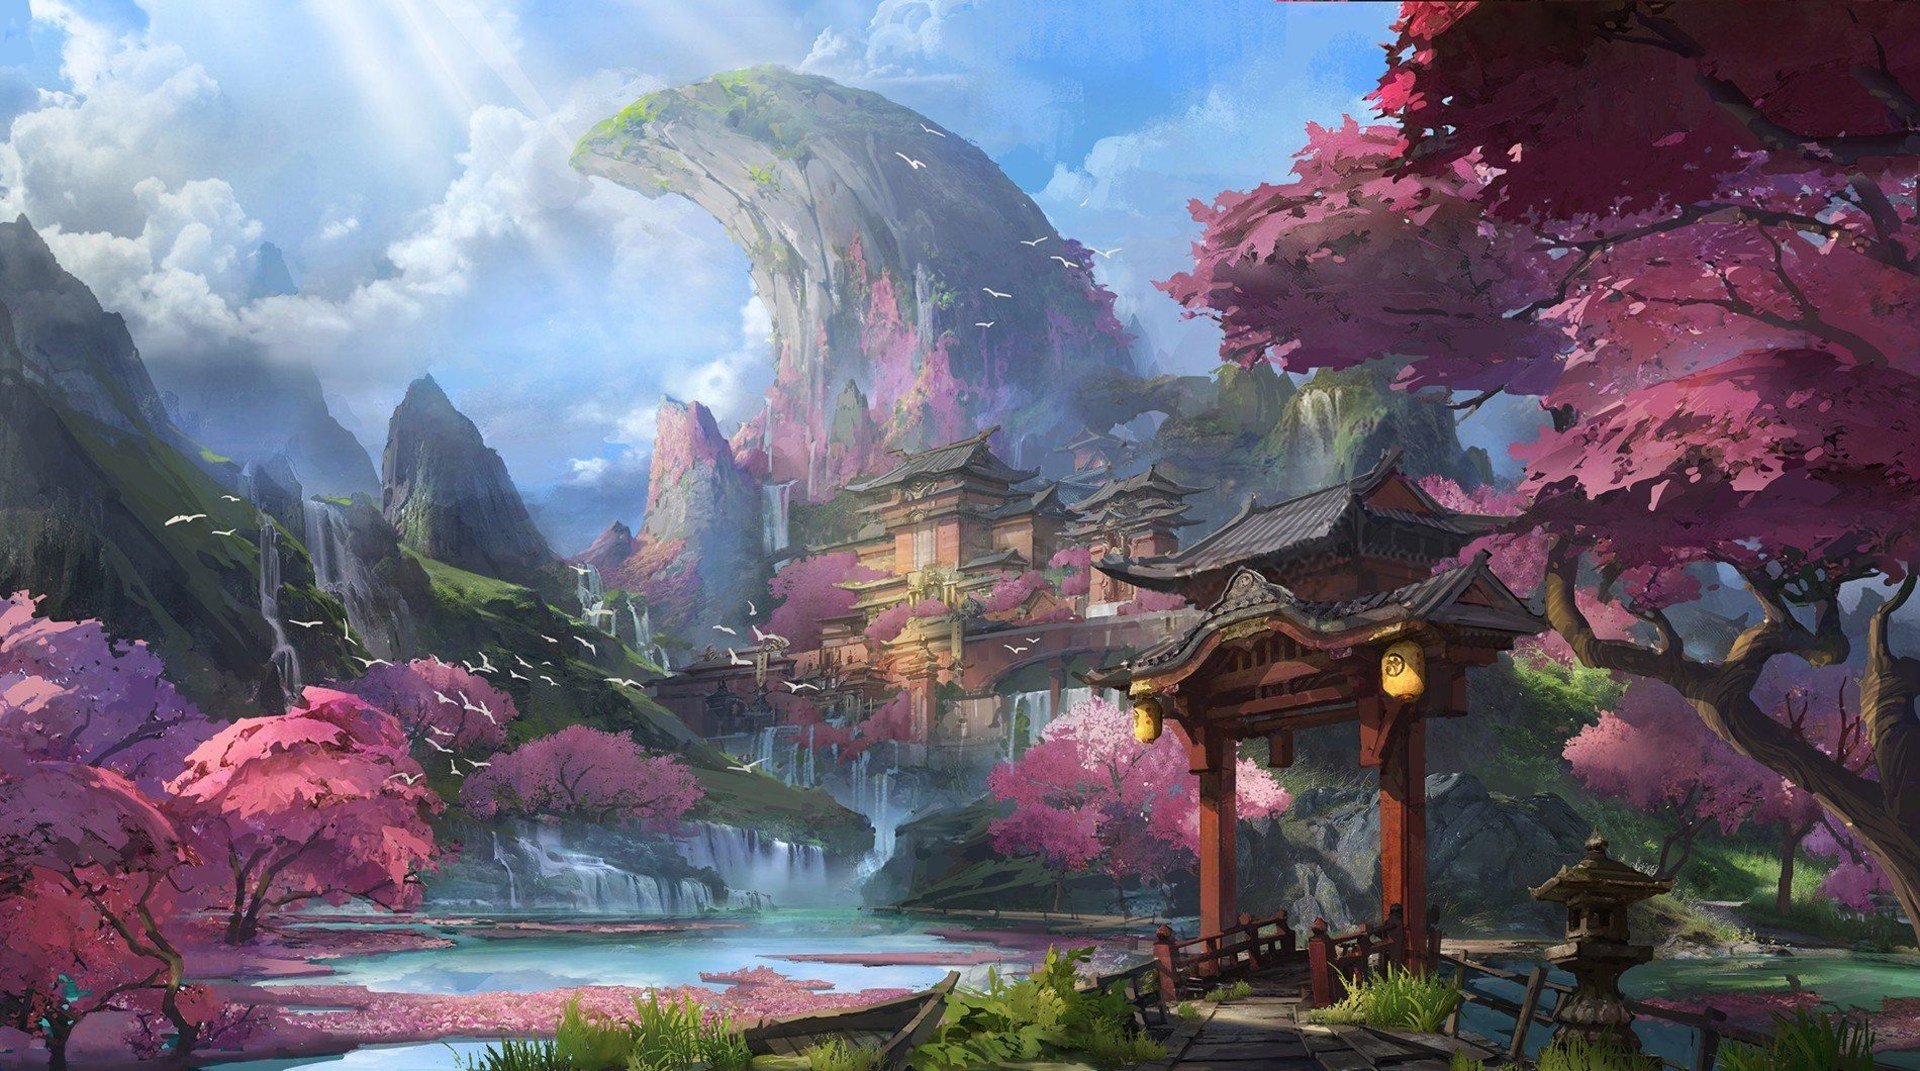 Wallpaper / artwork, fantasy art, Chinese architecture, mountains, cherry blossom, river free download